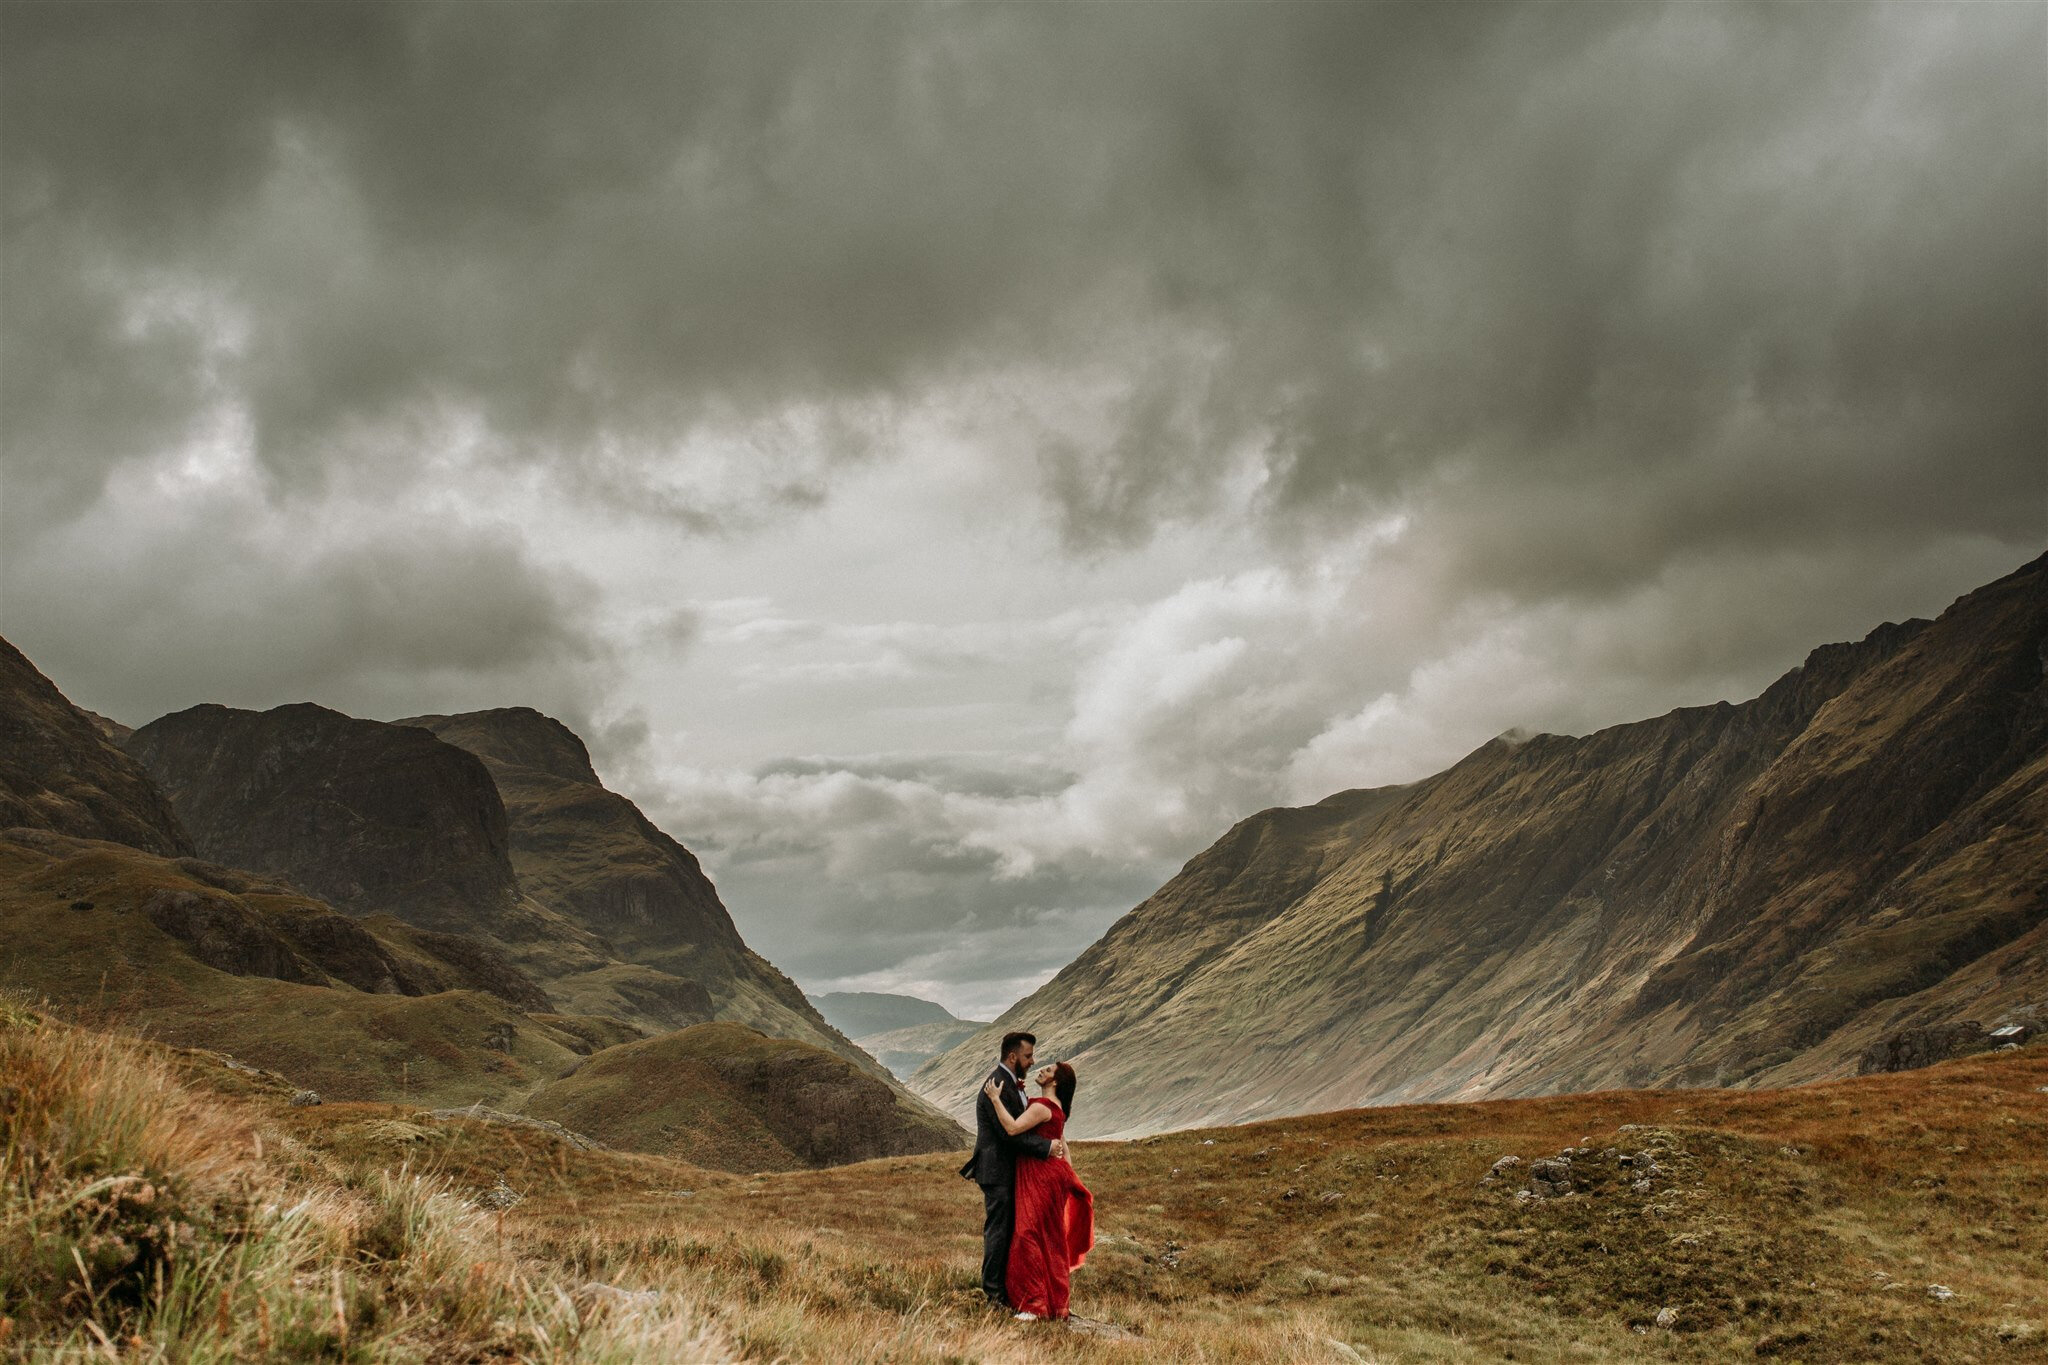 Glen Coe Scotland elopement adventure session. Bride in red dress and her groom holding each other and smiling in a field in the Scottish Highlands | Adventure elopement photographer